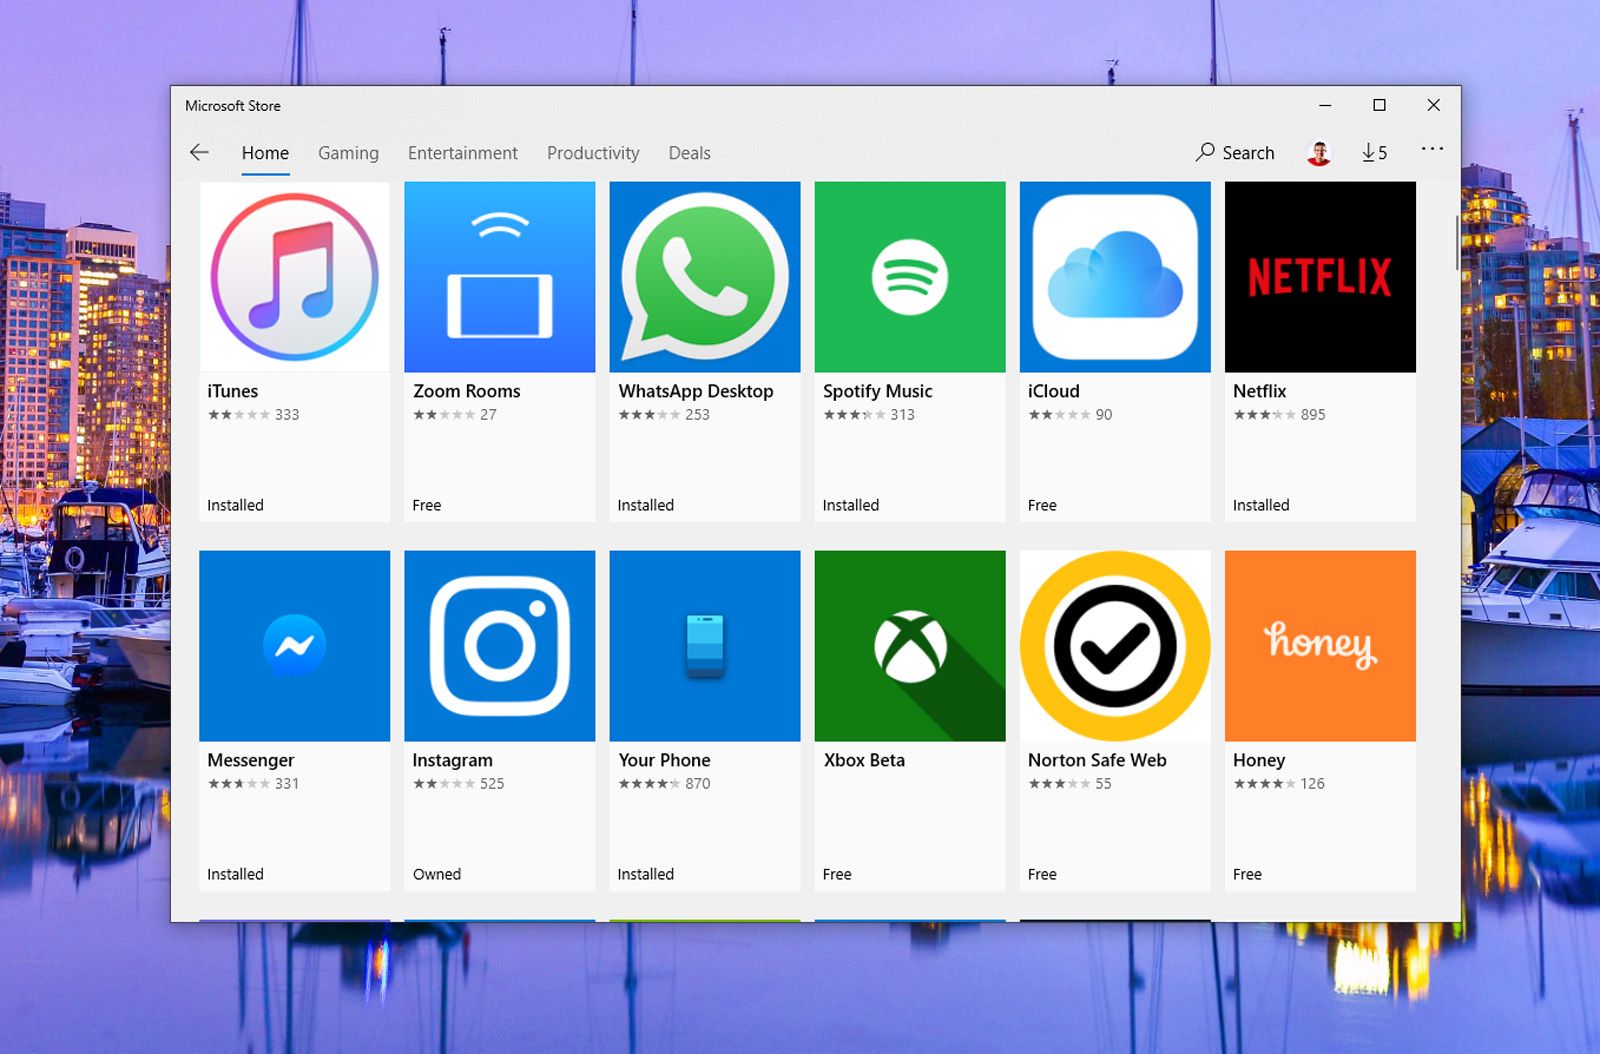 Project Reunion is Microsofts latest attempt to sort out the mess of Windows apps image 1